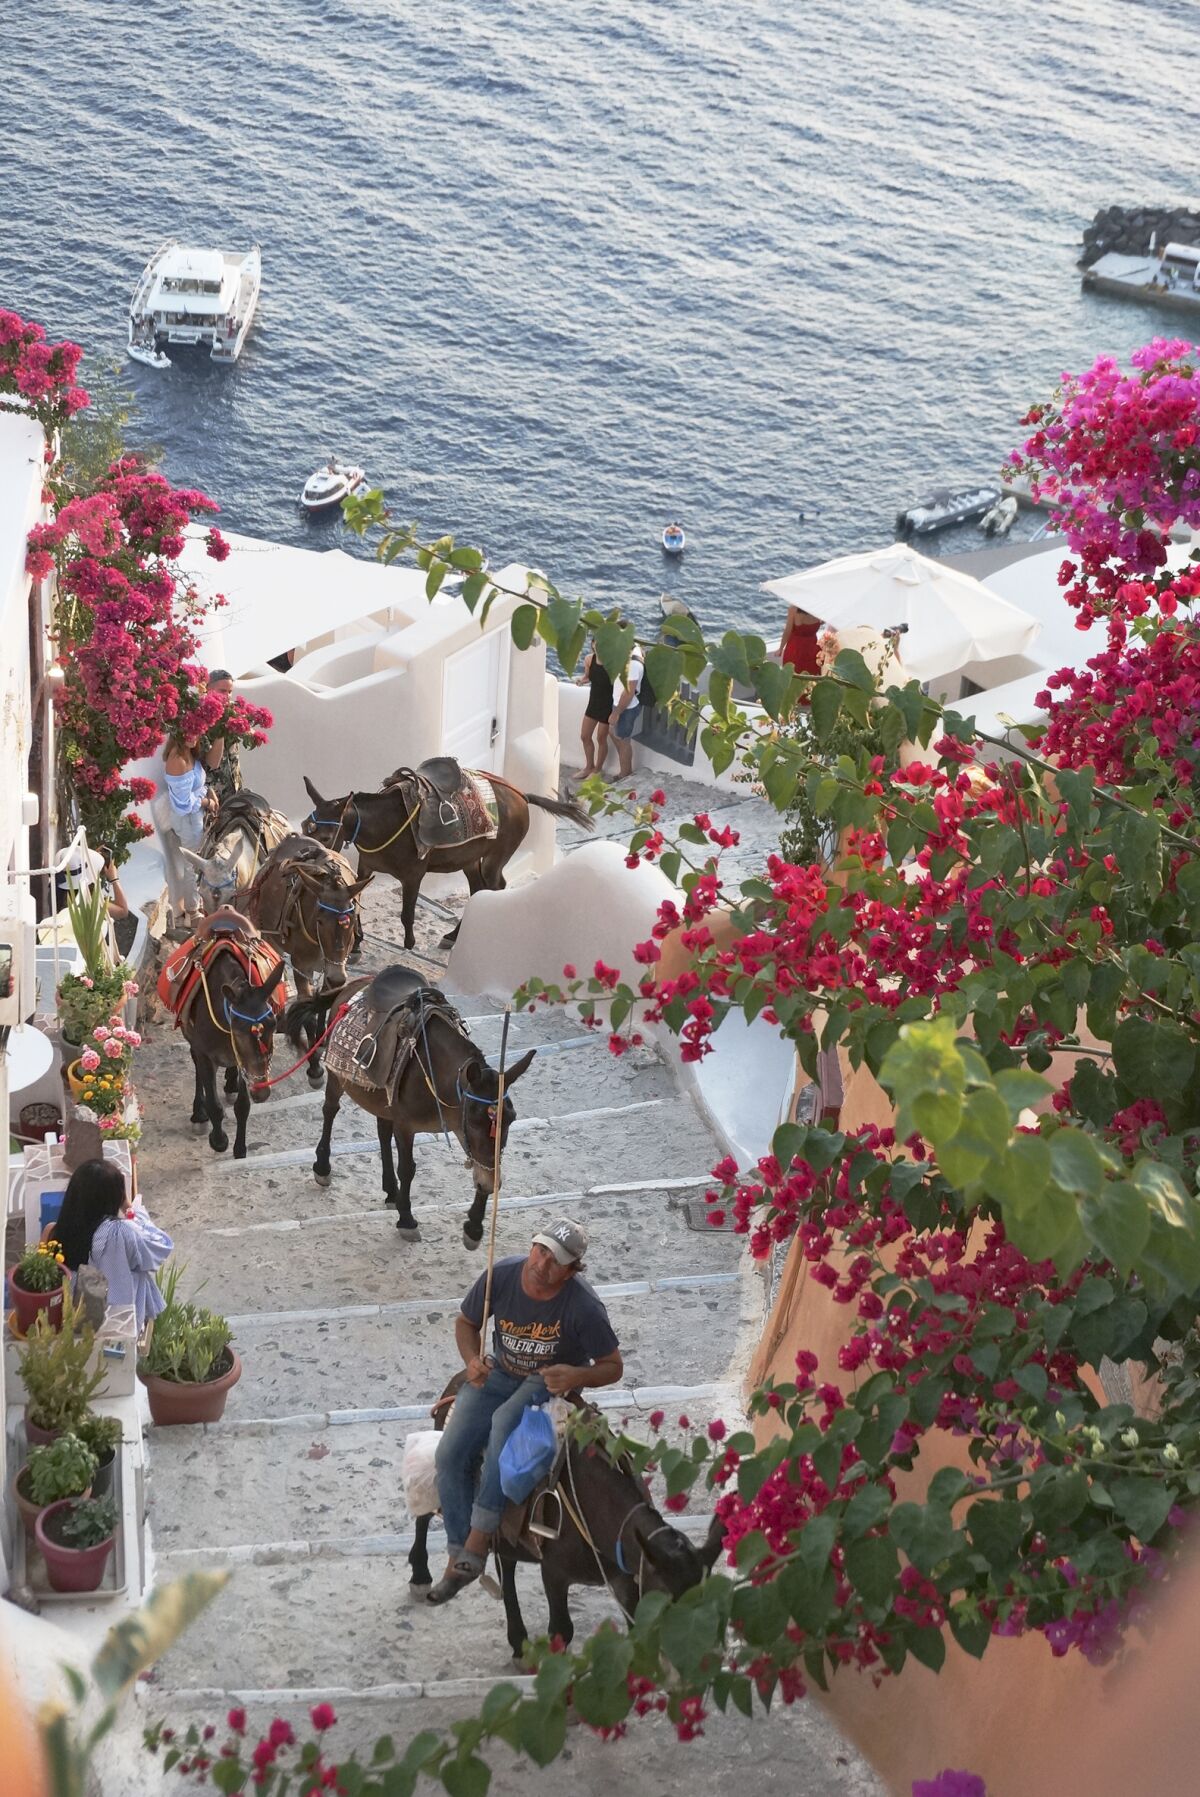 A man leads a pack of donkeys at dusk from the port up to the village of Oia on Santorini island, Greece.